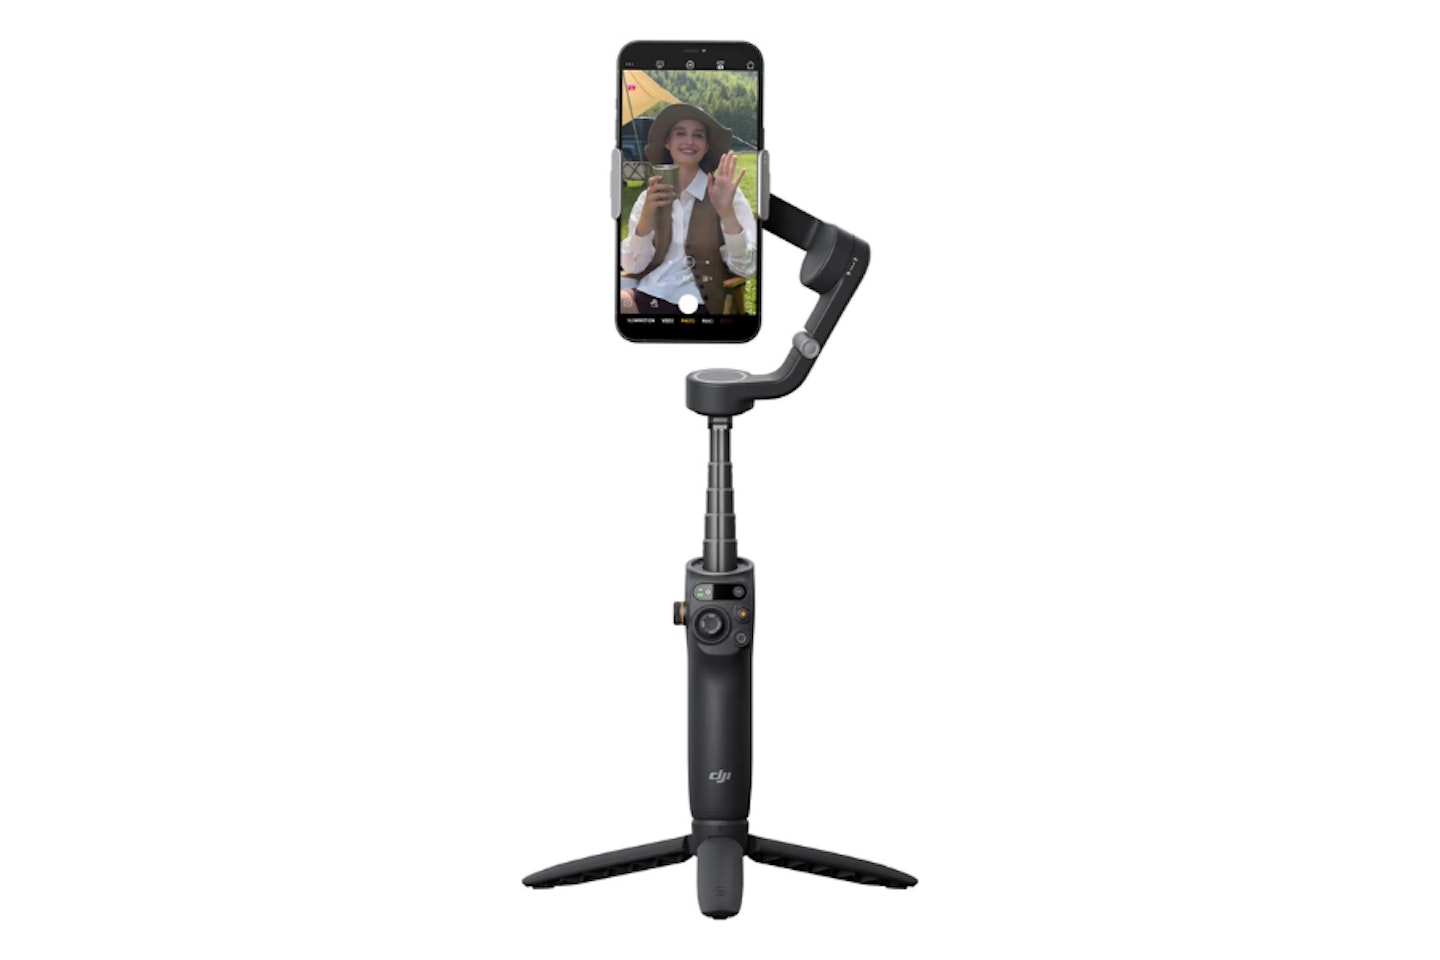 DJI OSMO Mobile 6 Smartphone Gimbal Stabilizer - possibly the best smartphone gimbal